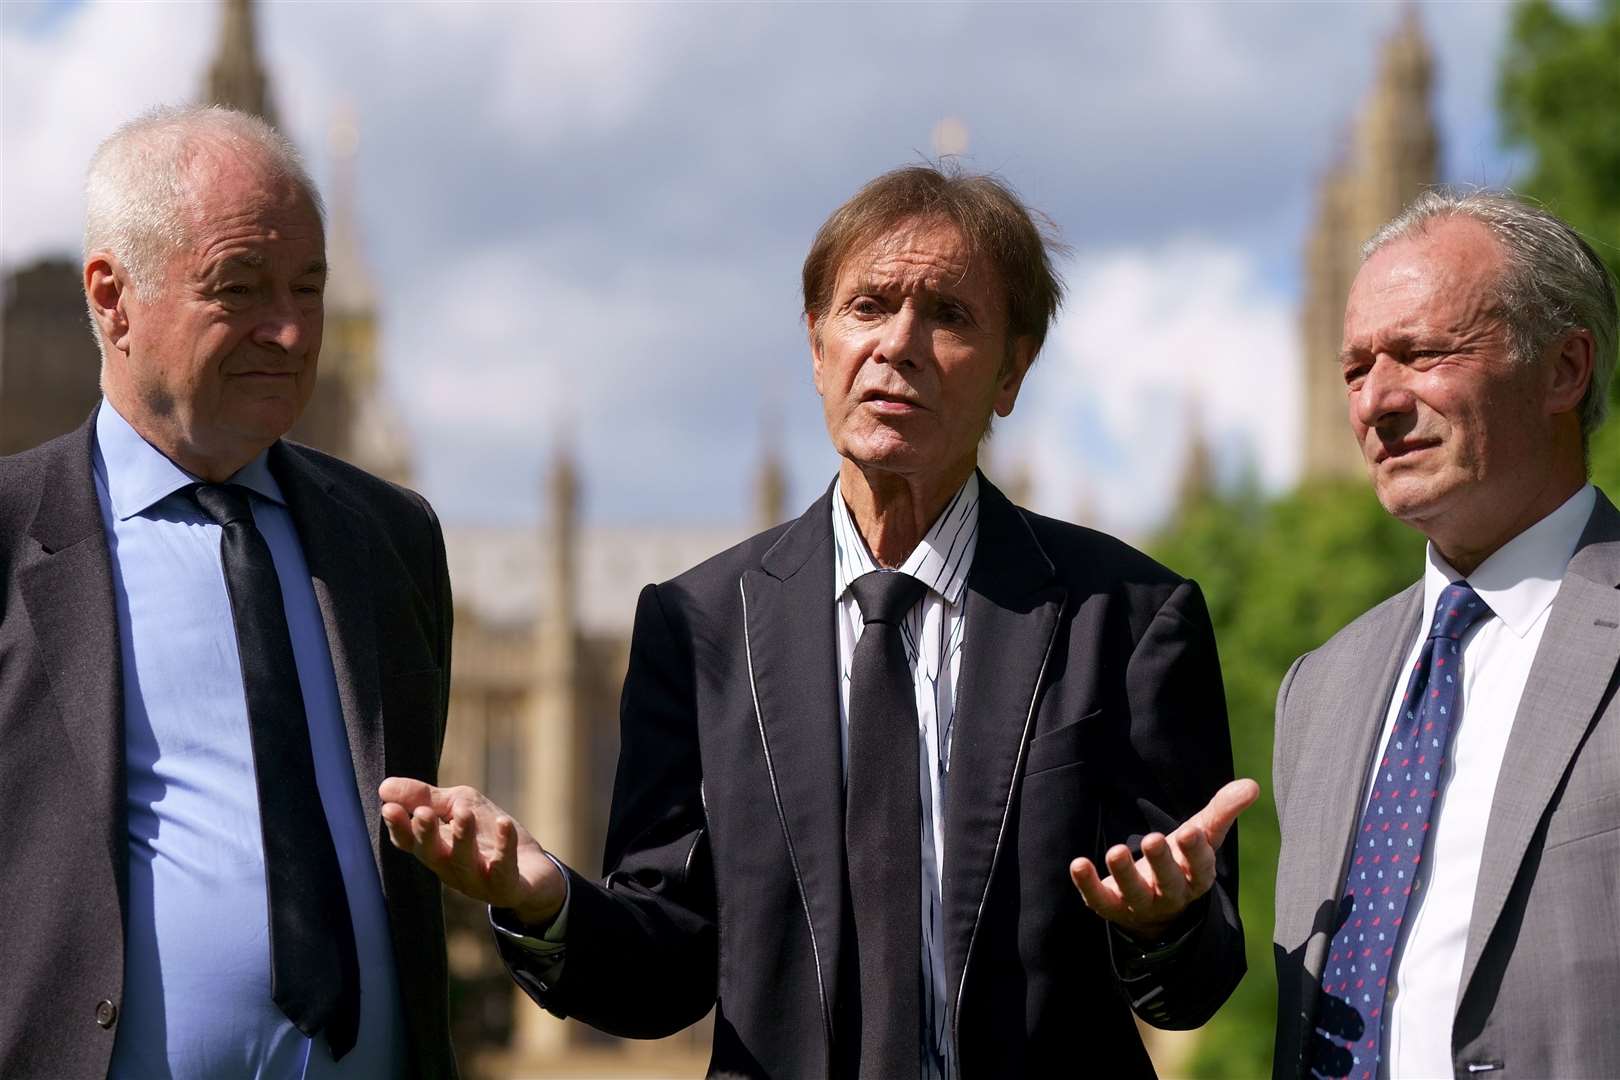 Paul Gambaccini, left to right, Sir Cliff and Daniel Janner QC revived a campaign calling for suspects to have their anonymity protected by law unless charged (Victoria Jones/PA)